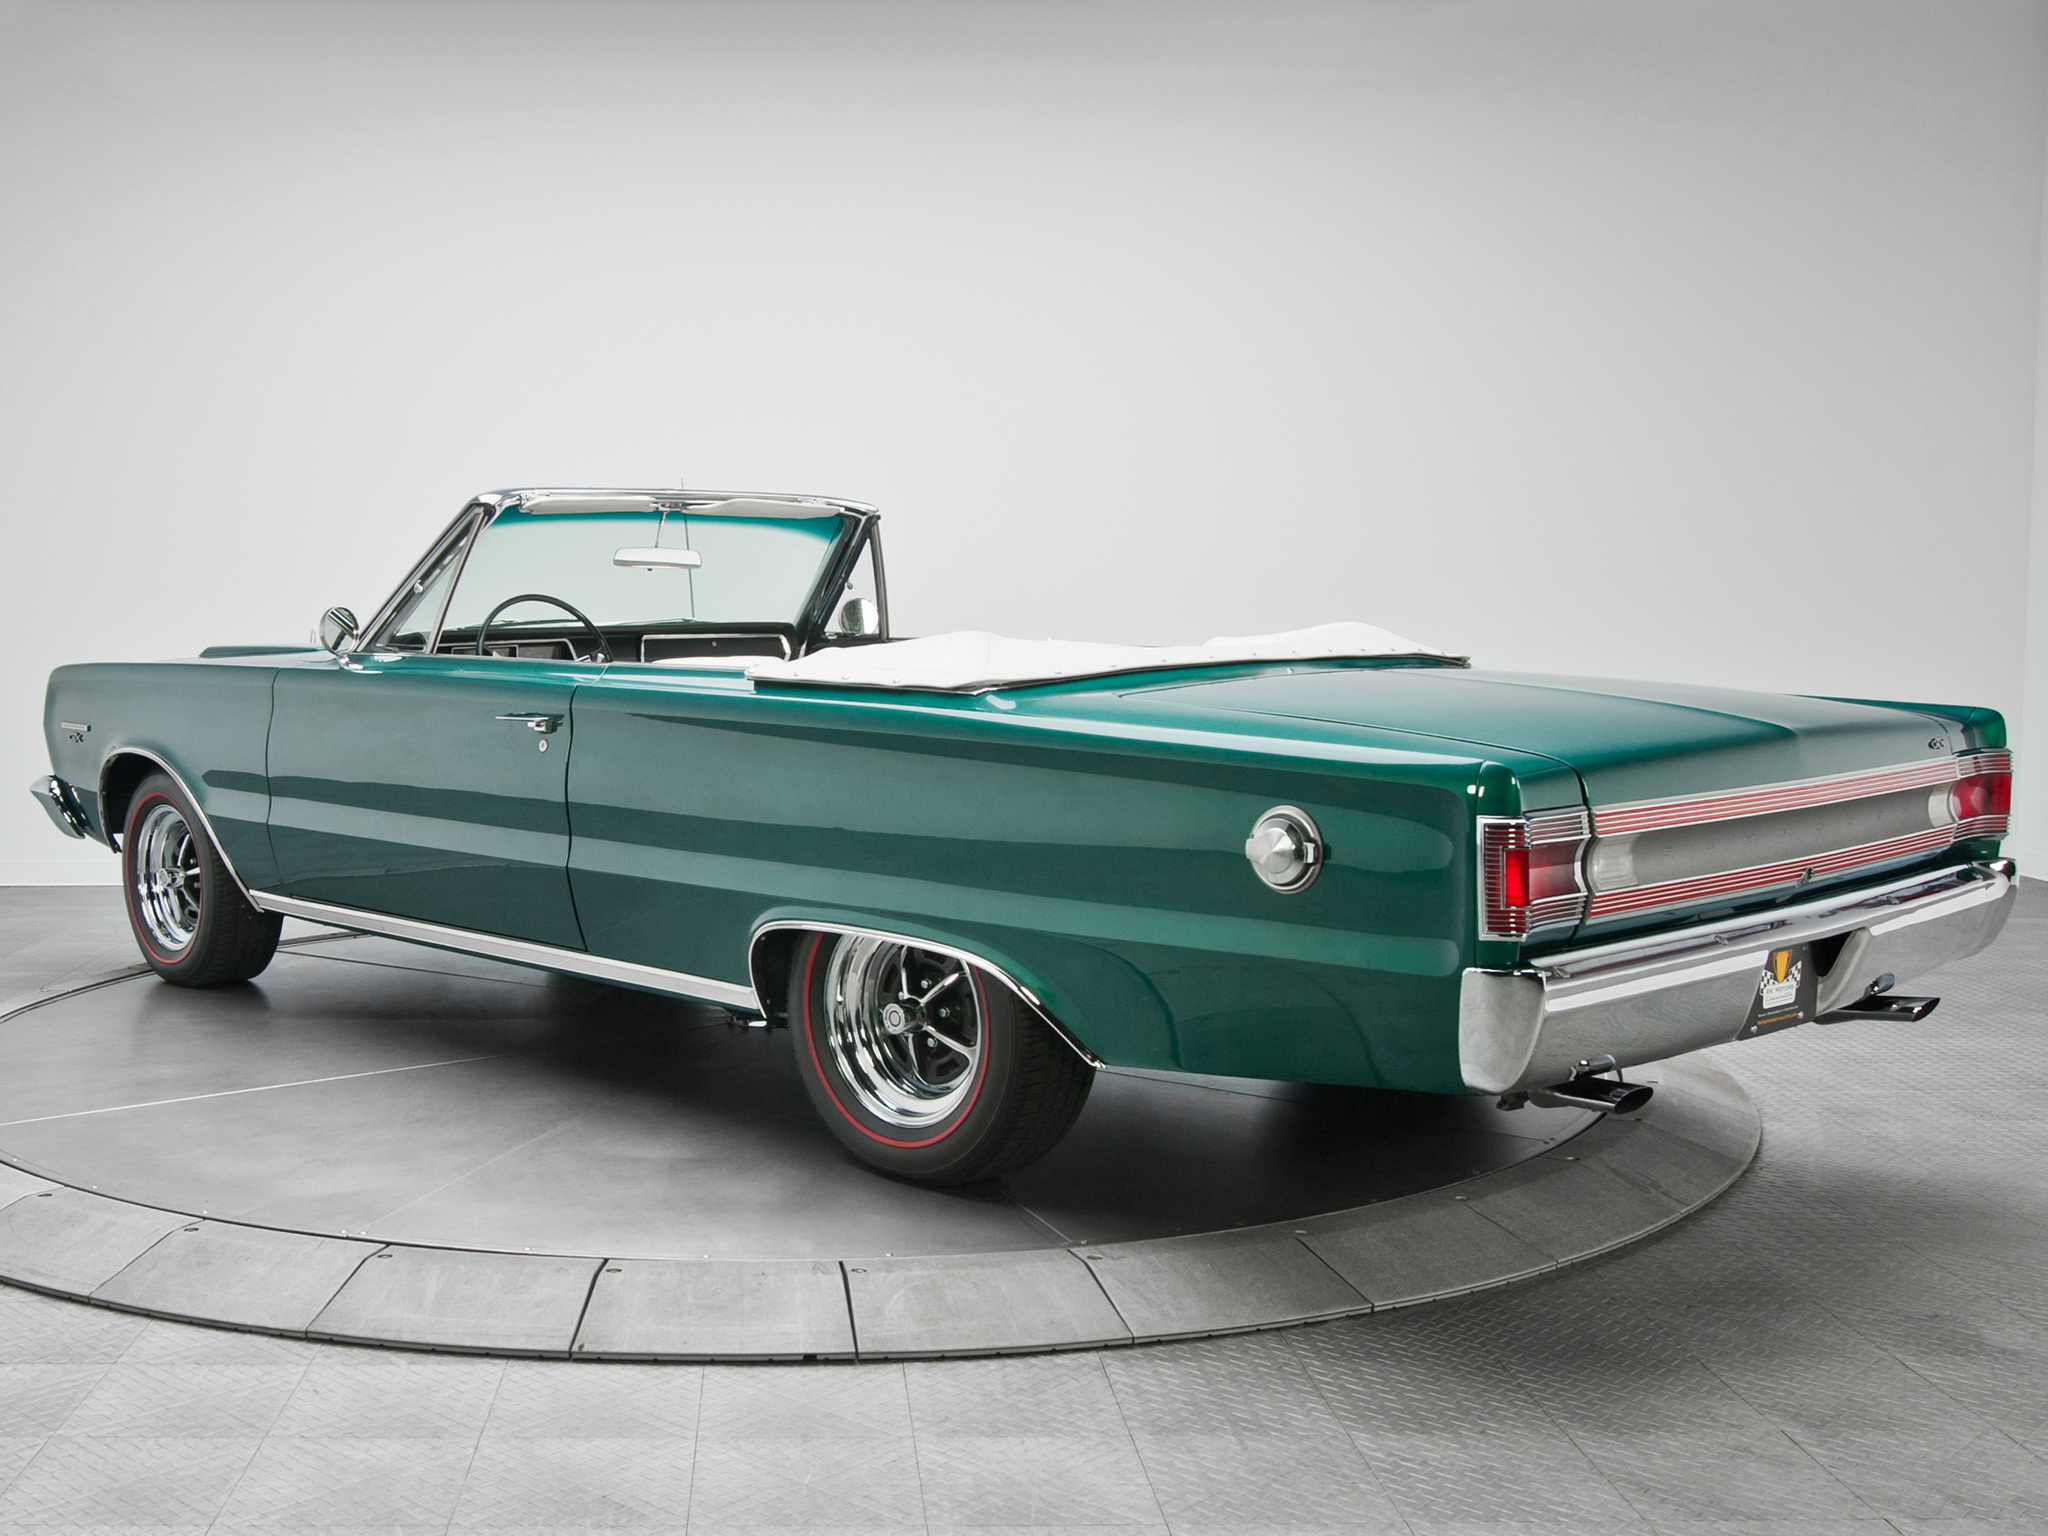 Gtx Convertible Rs27 Muscle Classic Fs Wallpaper Background